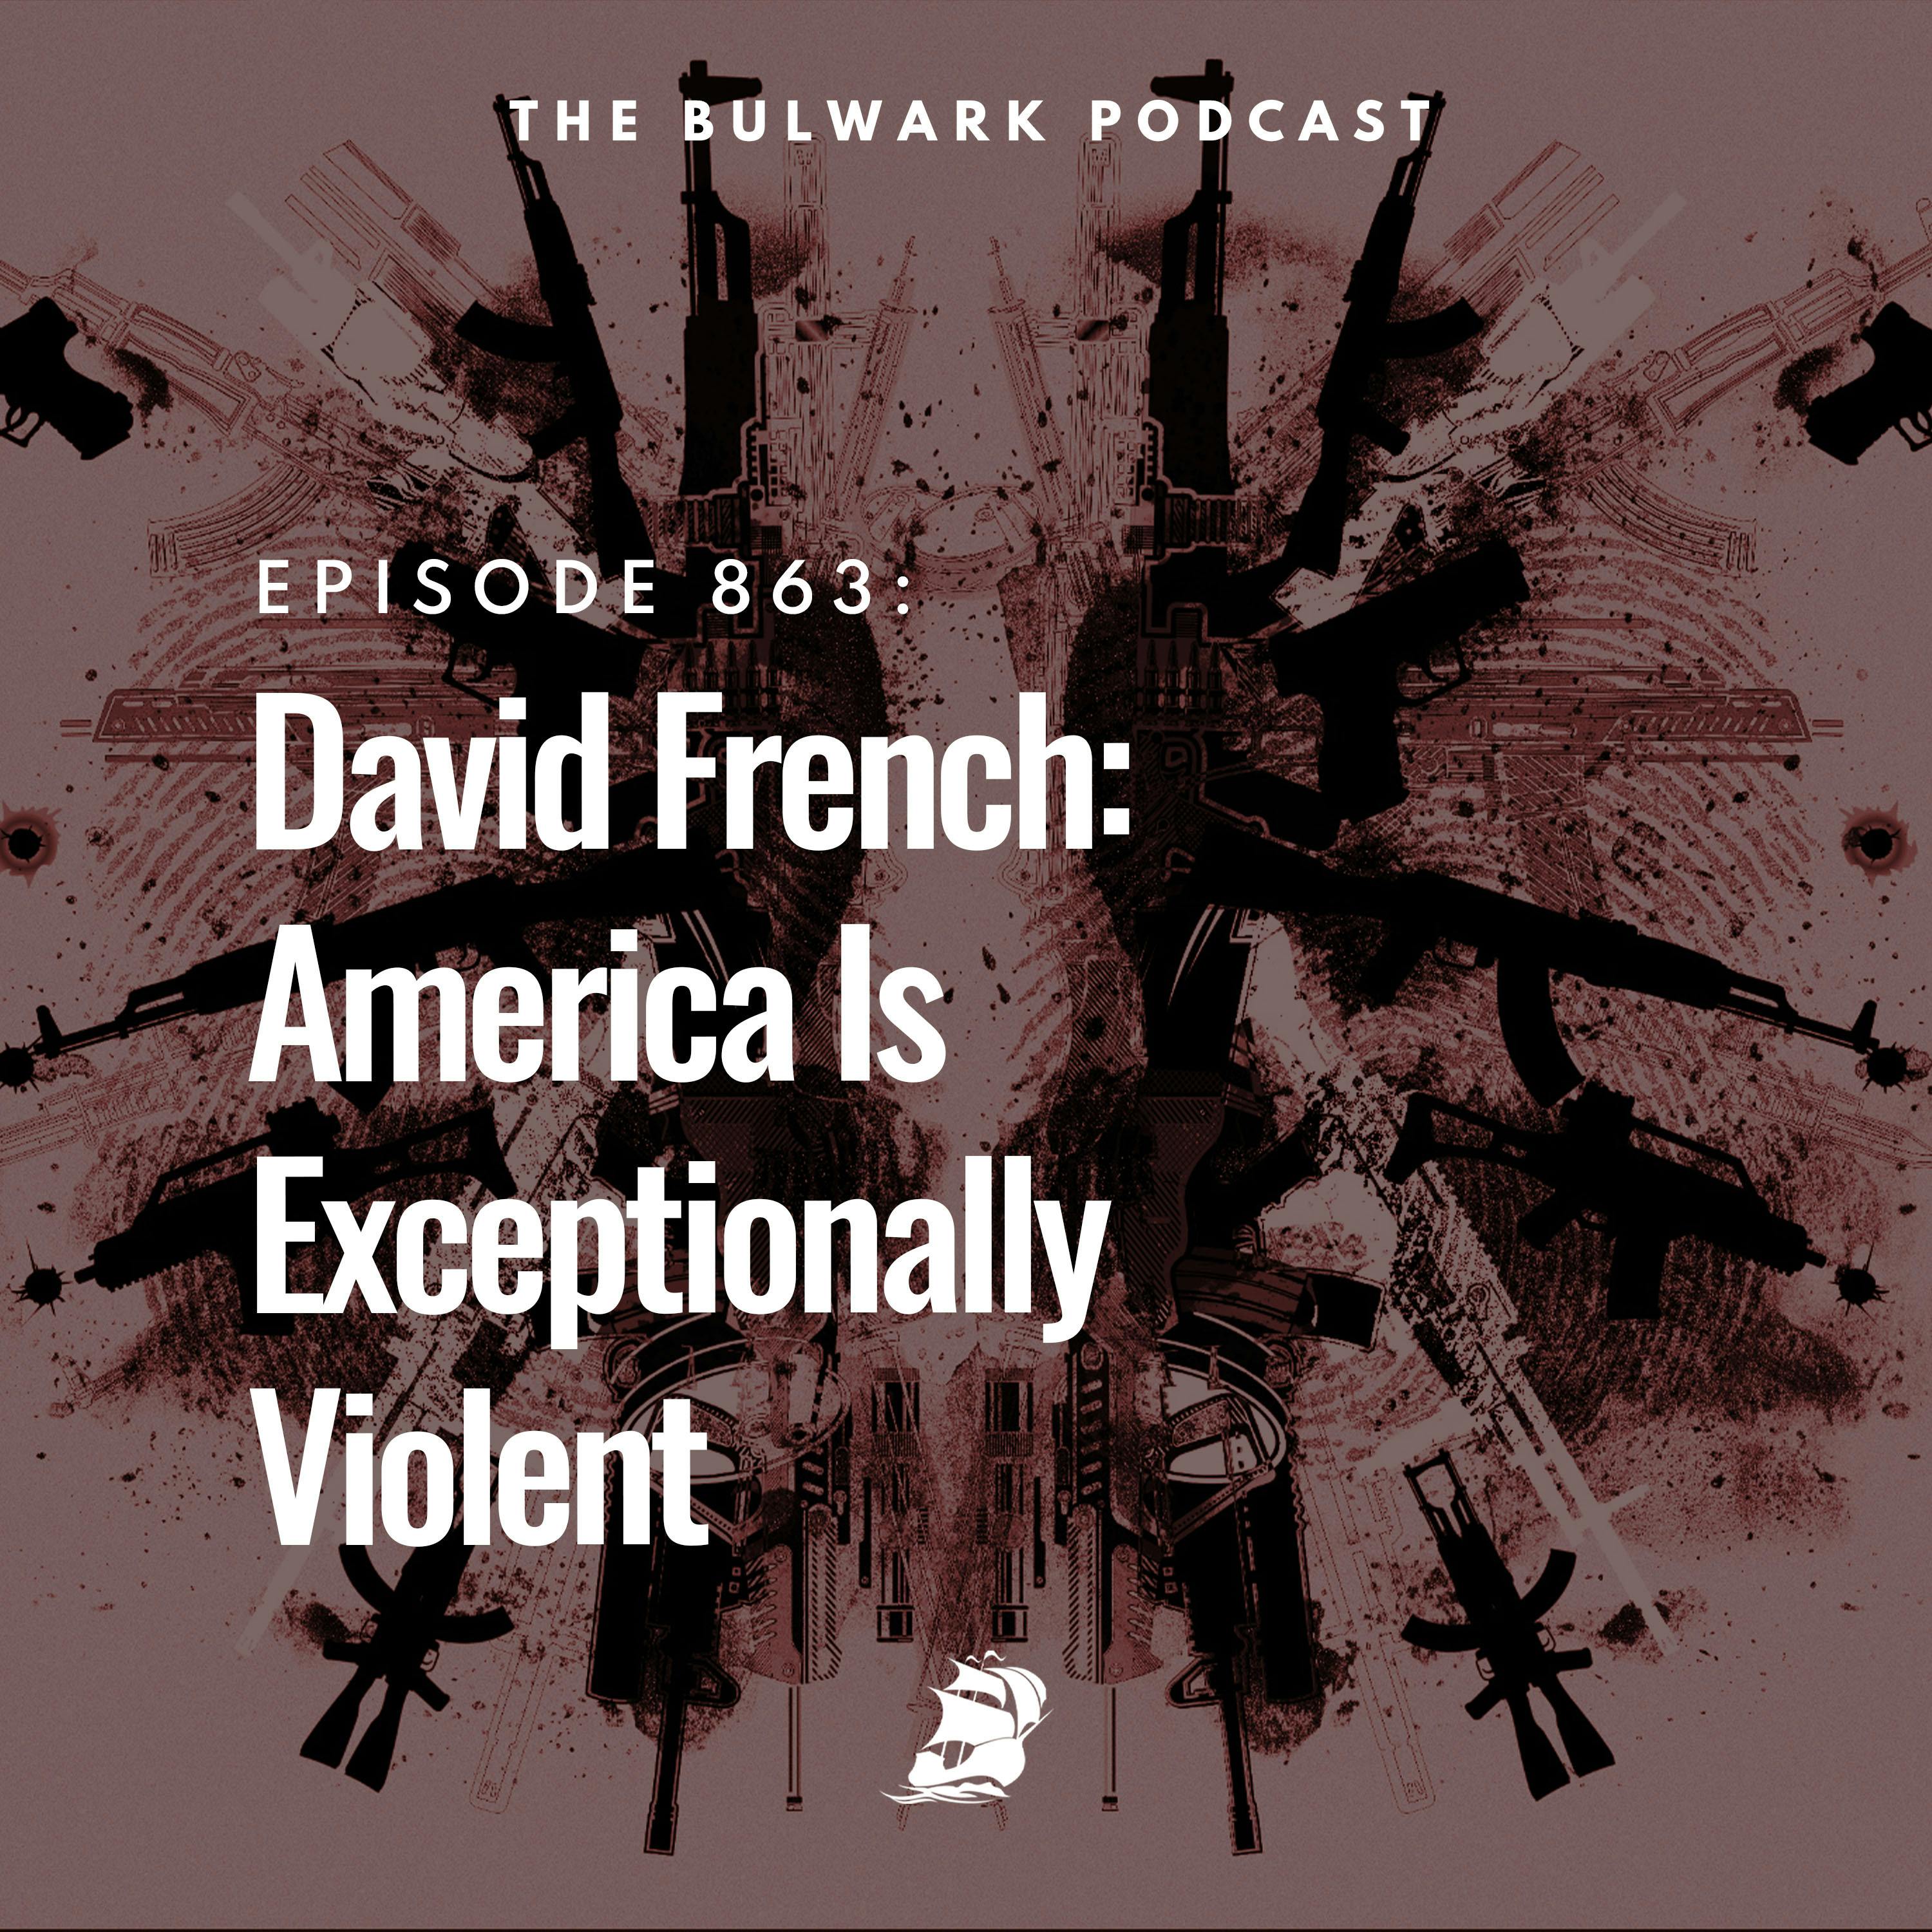 David French: America Is Exceptionally Violent